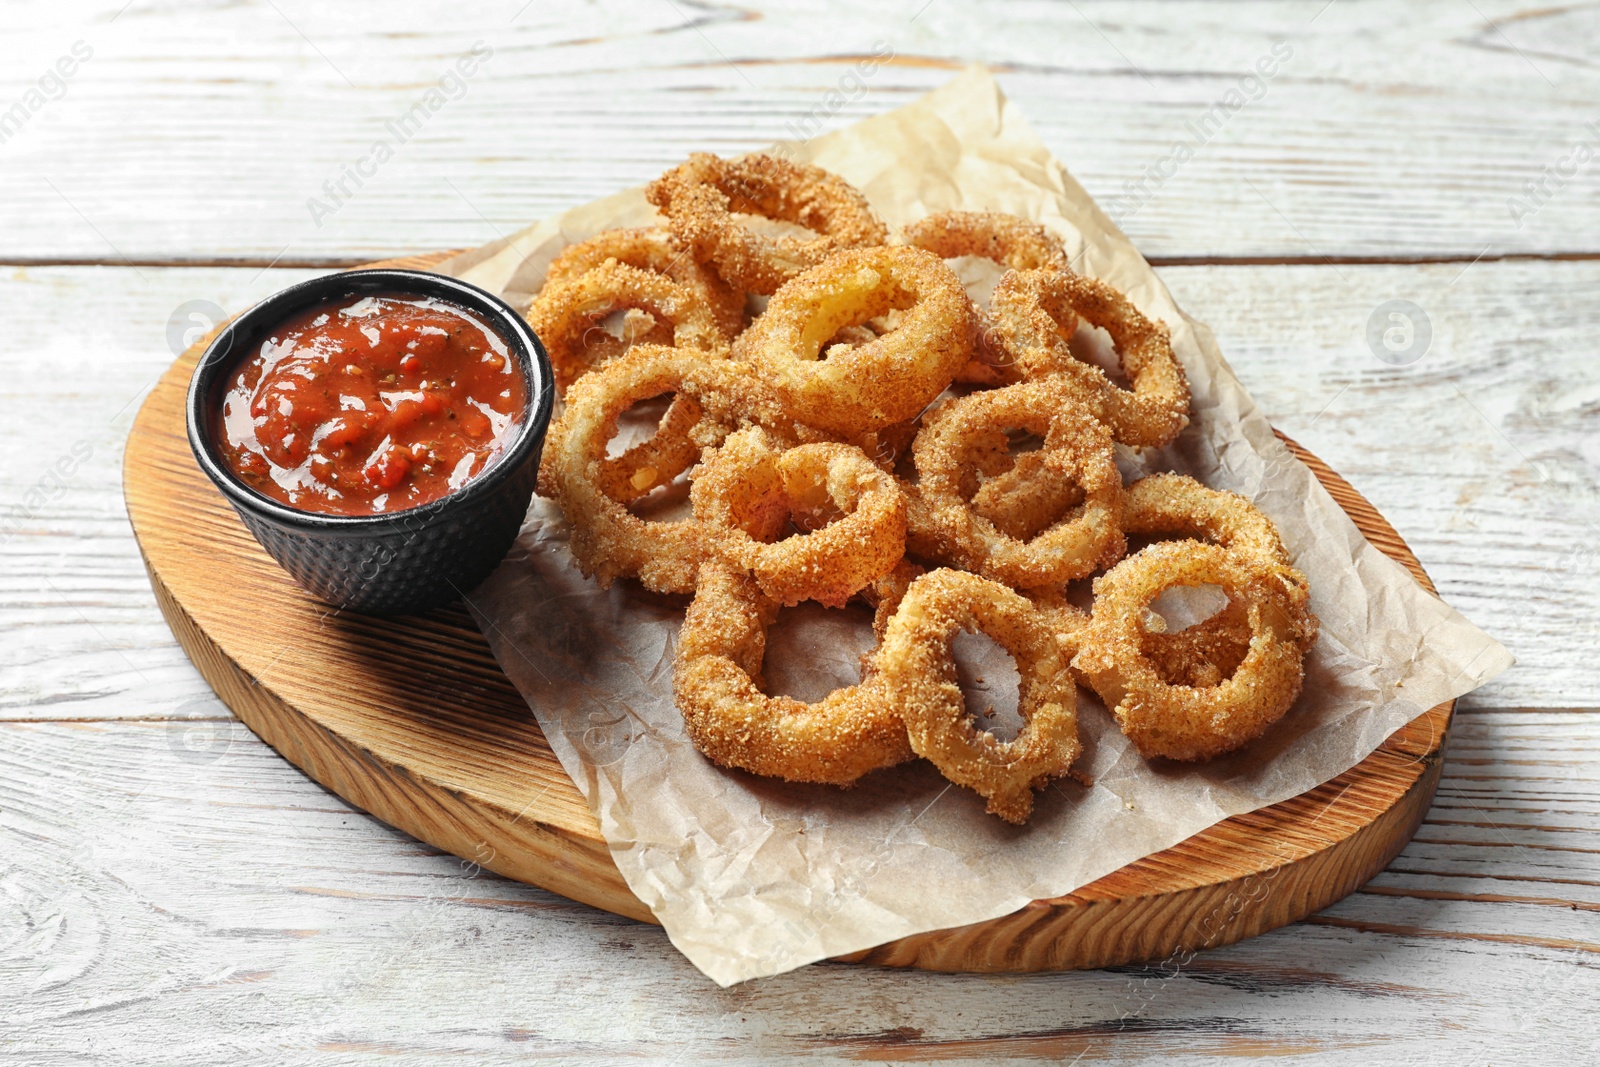 Photo of Homemade crunchy fried onion rings with tomato sauce on wooden table